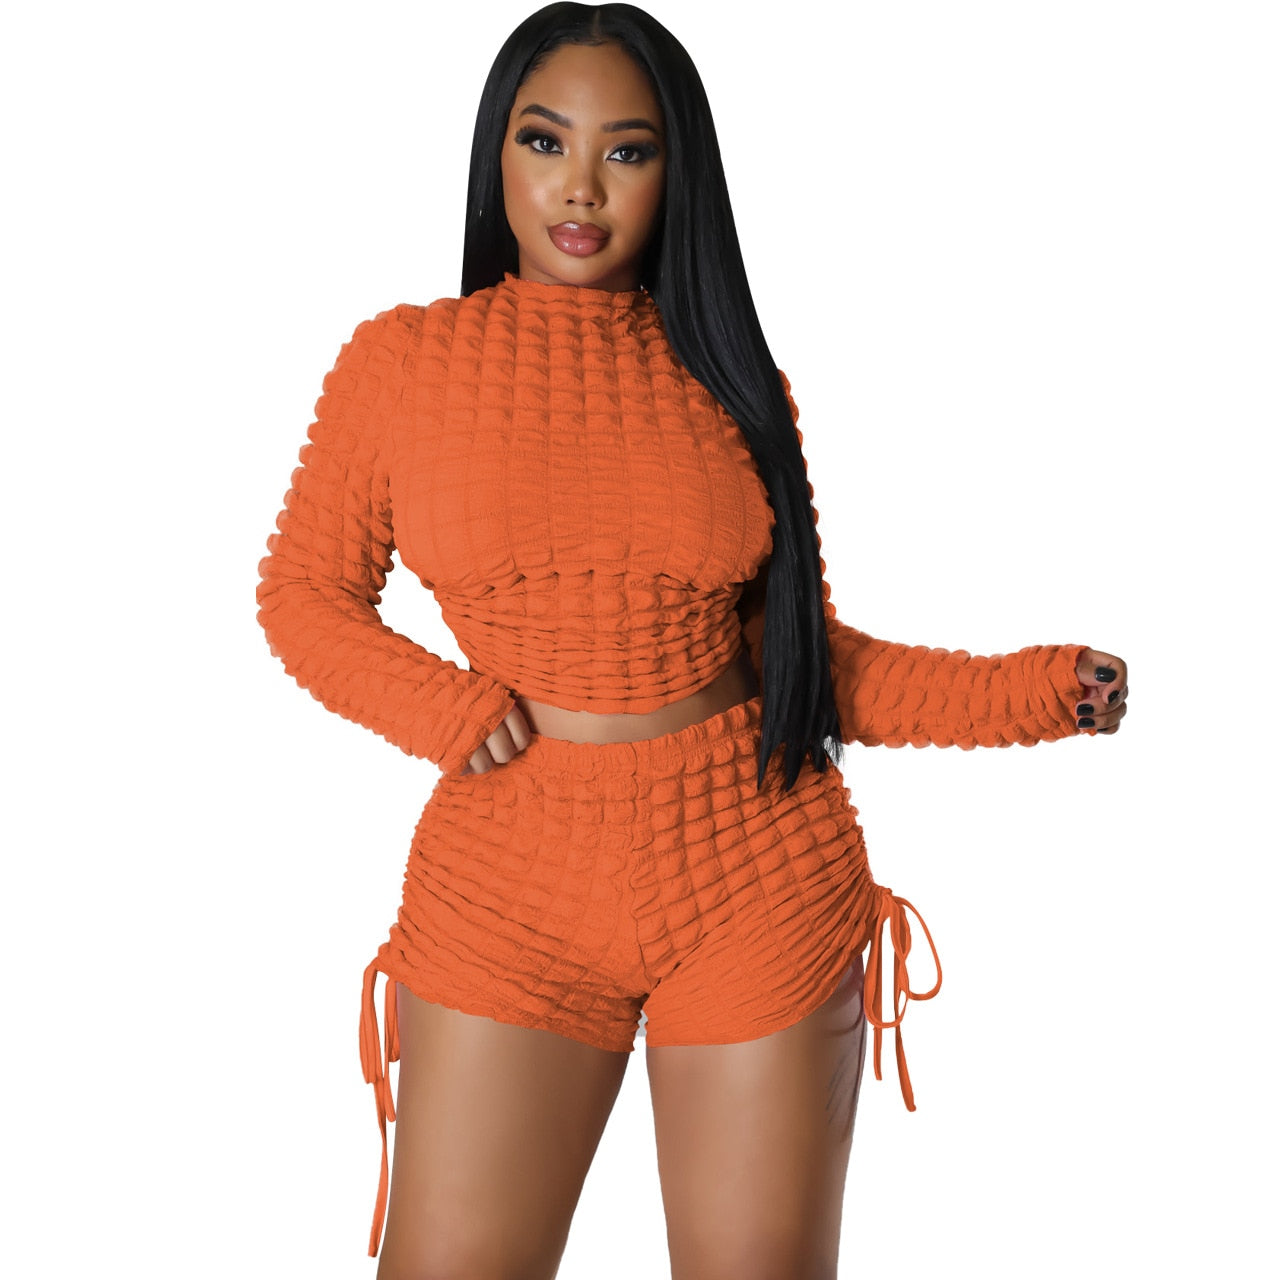 Two Piece Set- Bandage Short Tracksuit Top + Drawstring Shorts Outfit